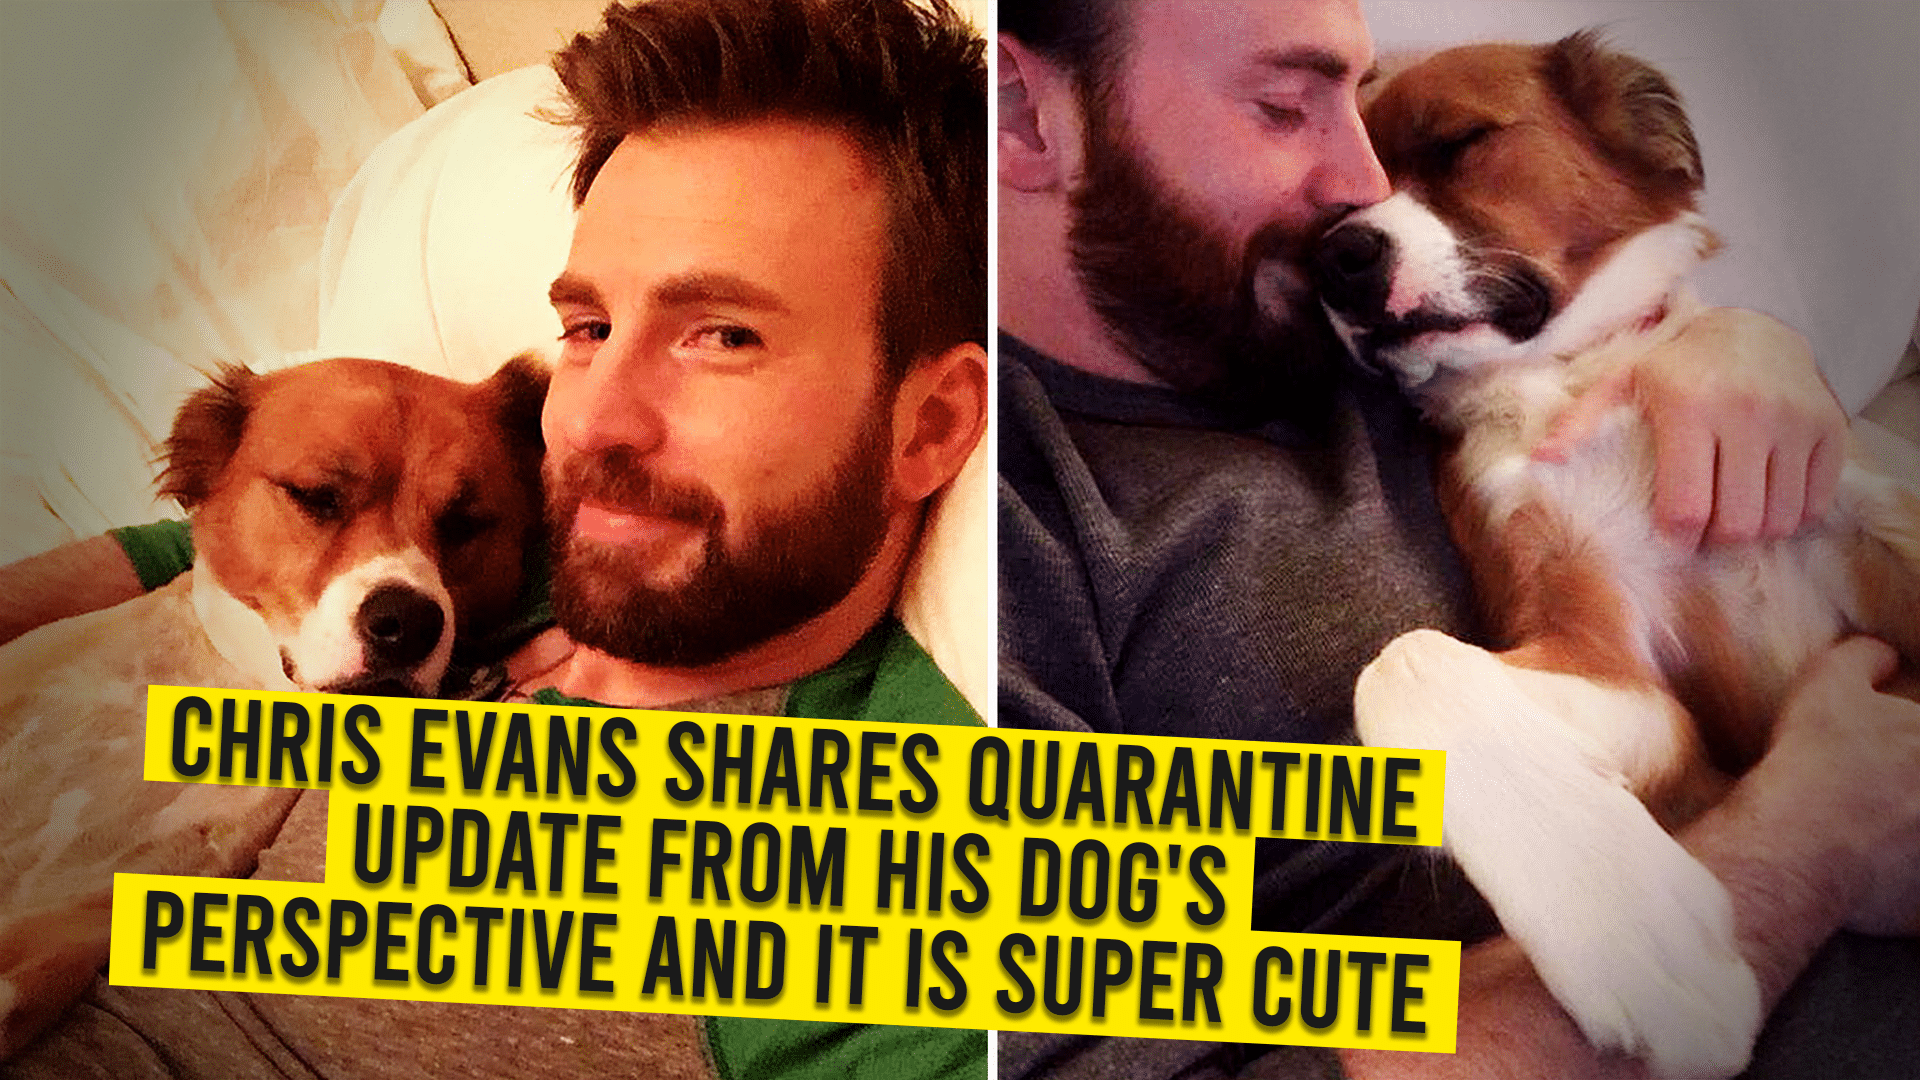 Chris Evans Shares Quarantine Update From His Dog’s Perspective And It is Super Cute